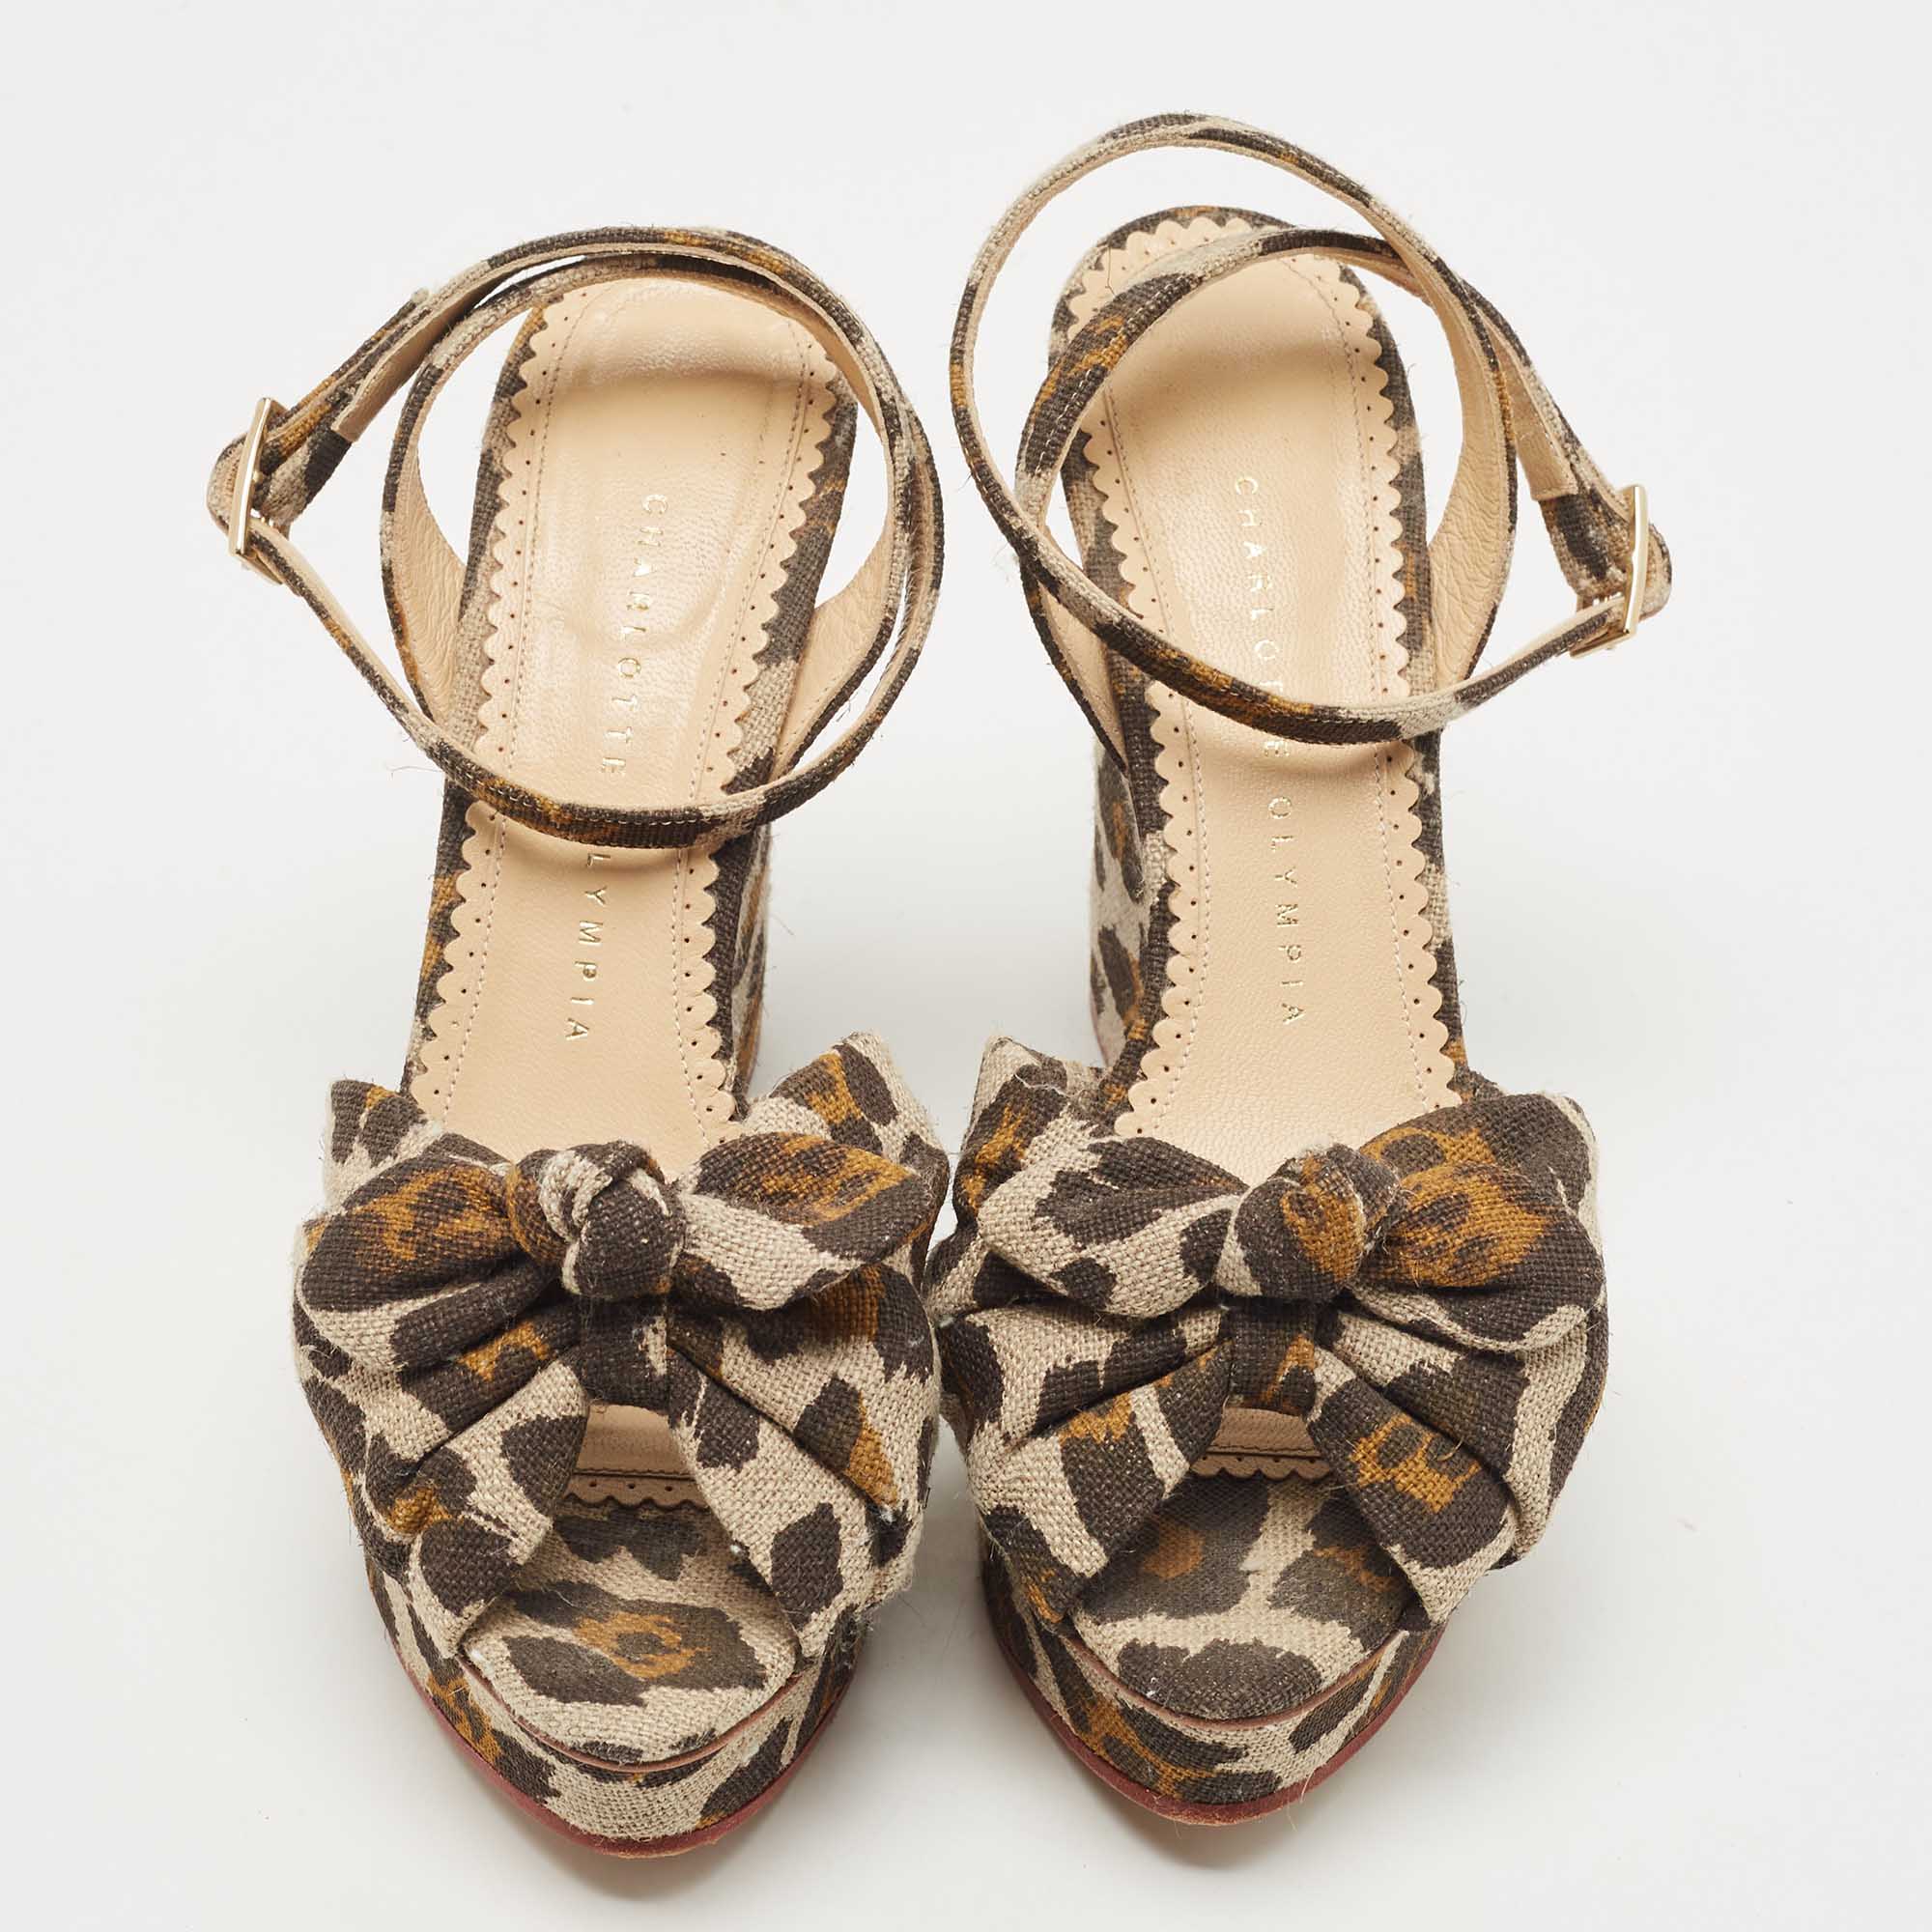 Charlotte Olympia Beige/Brown Leopard Canvas Bow Platform Ankle Strap Wedge Sandals Size 38.5